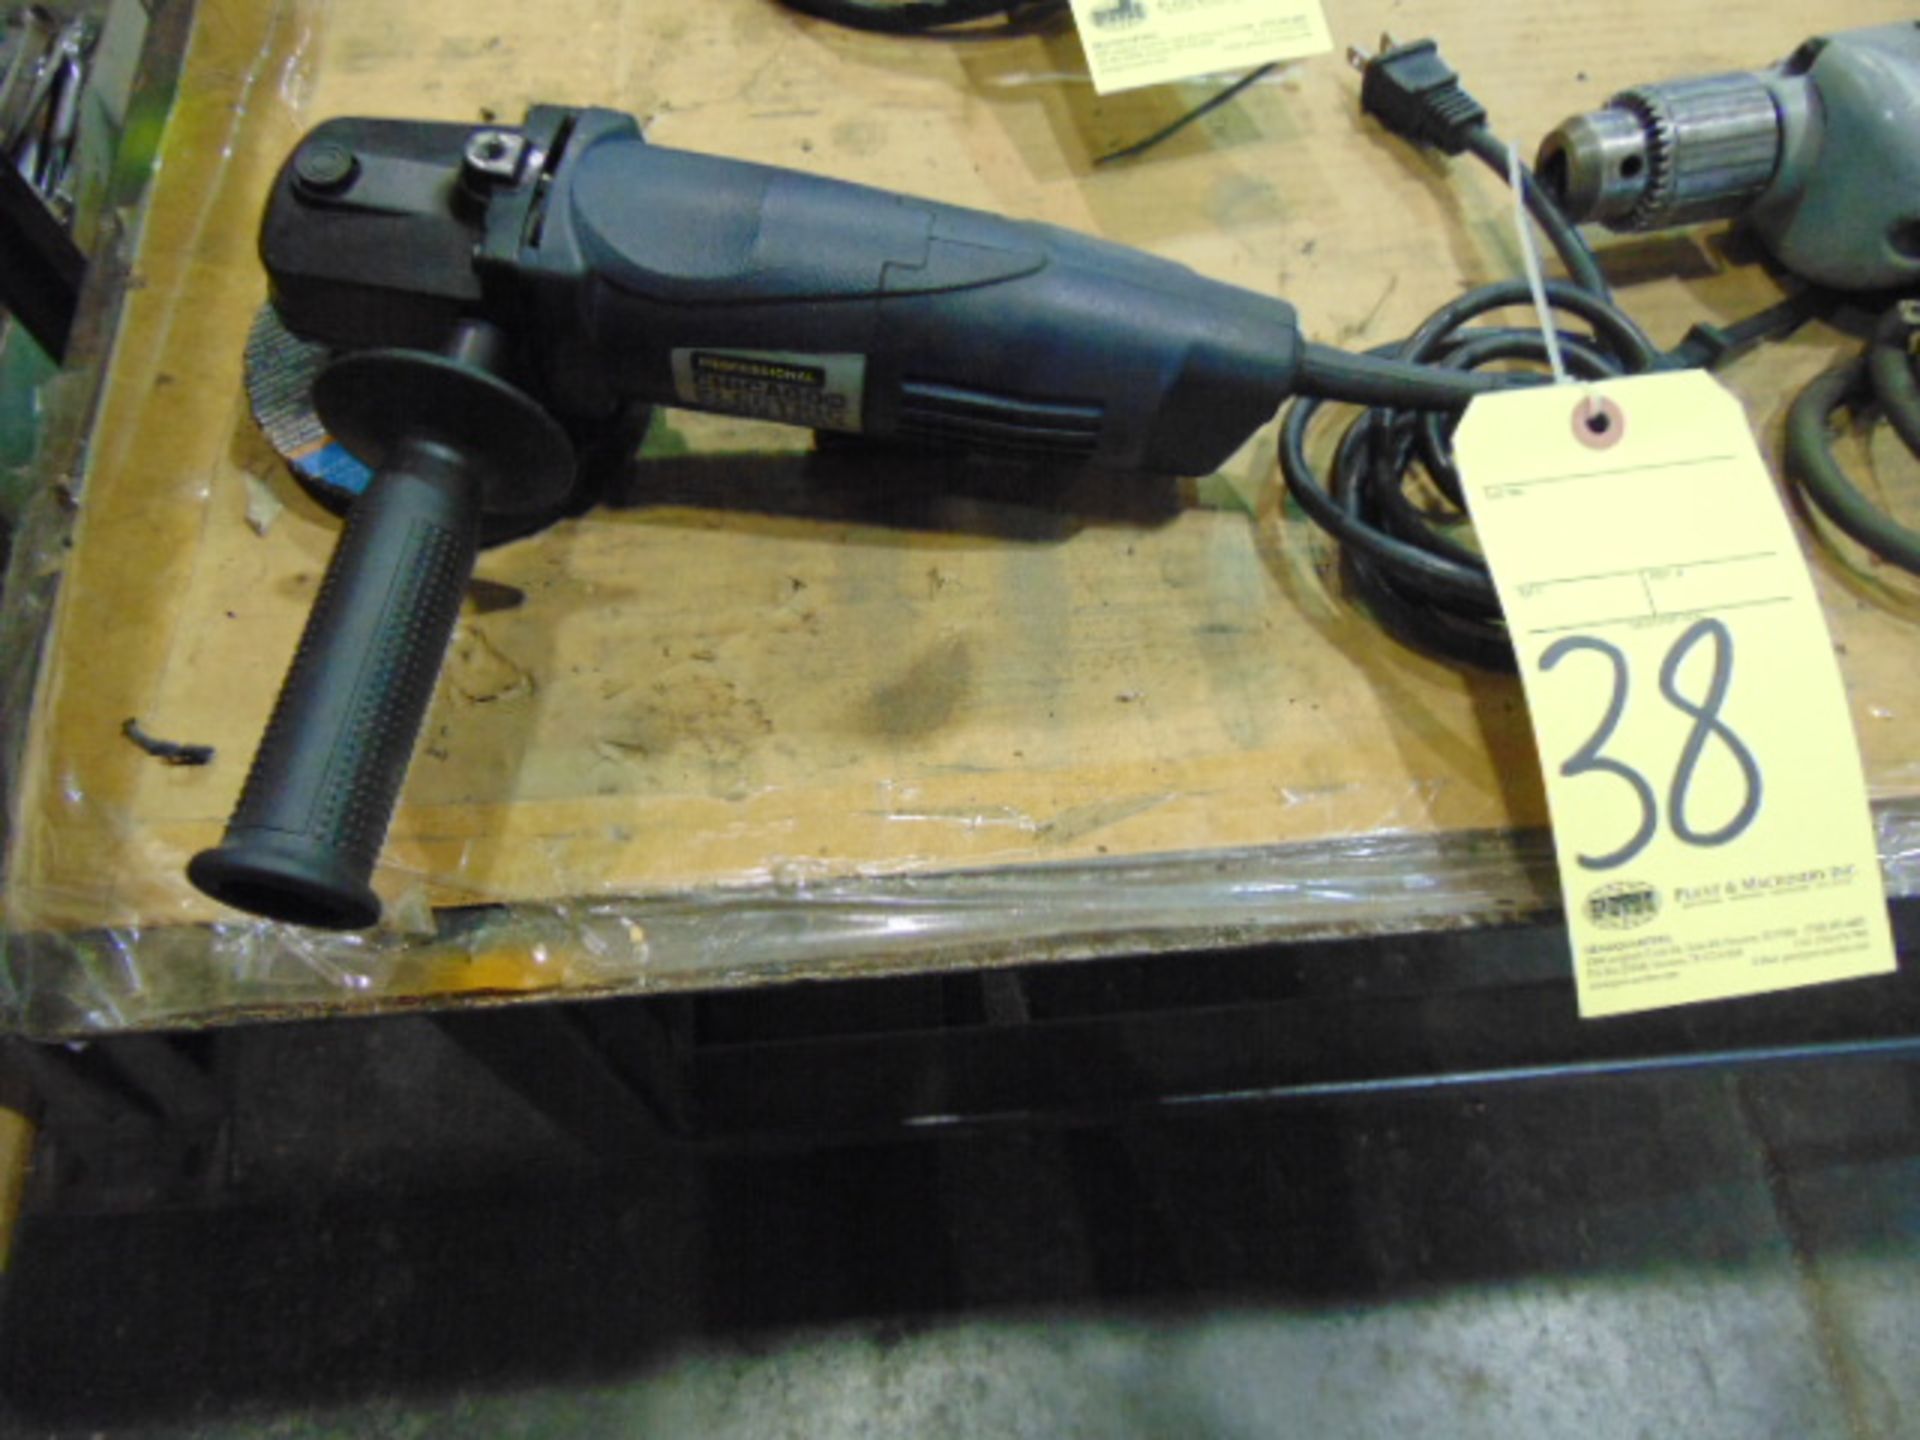 RIGHT ANGLE GRINDER, CHICAGO ELECTRIC 4-1/2"